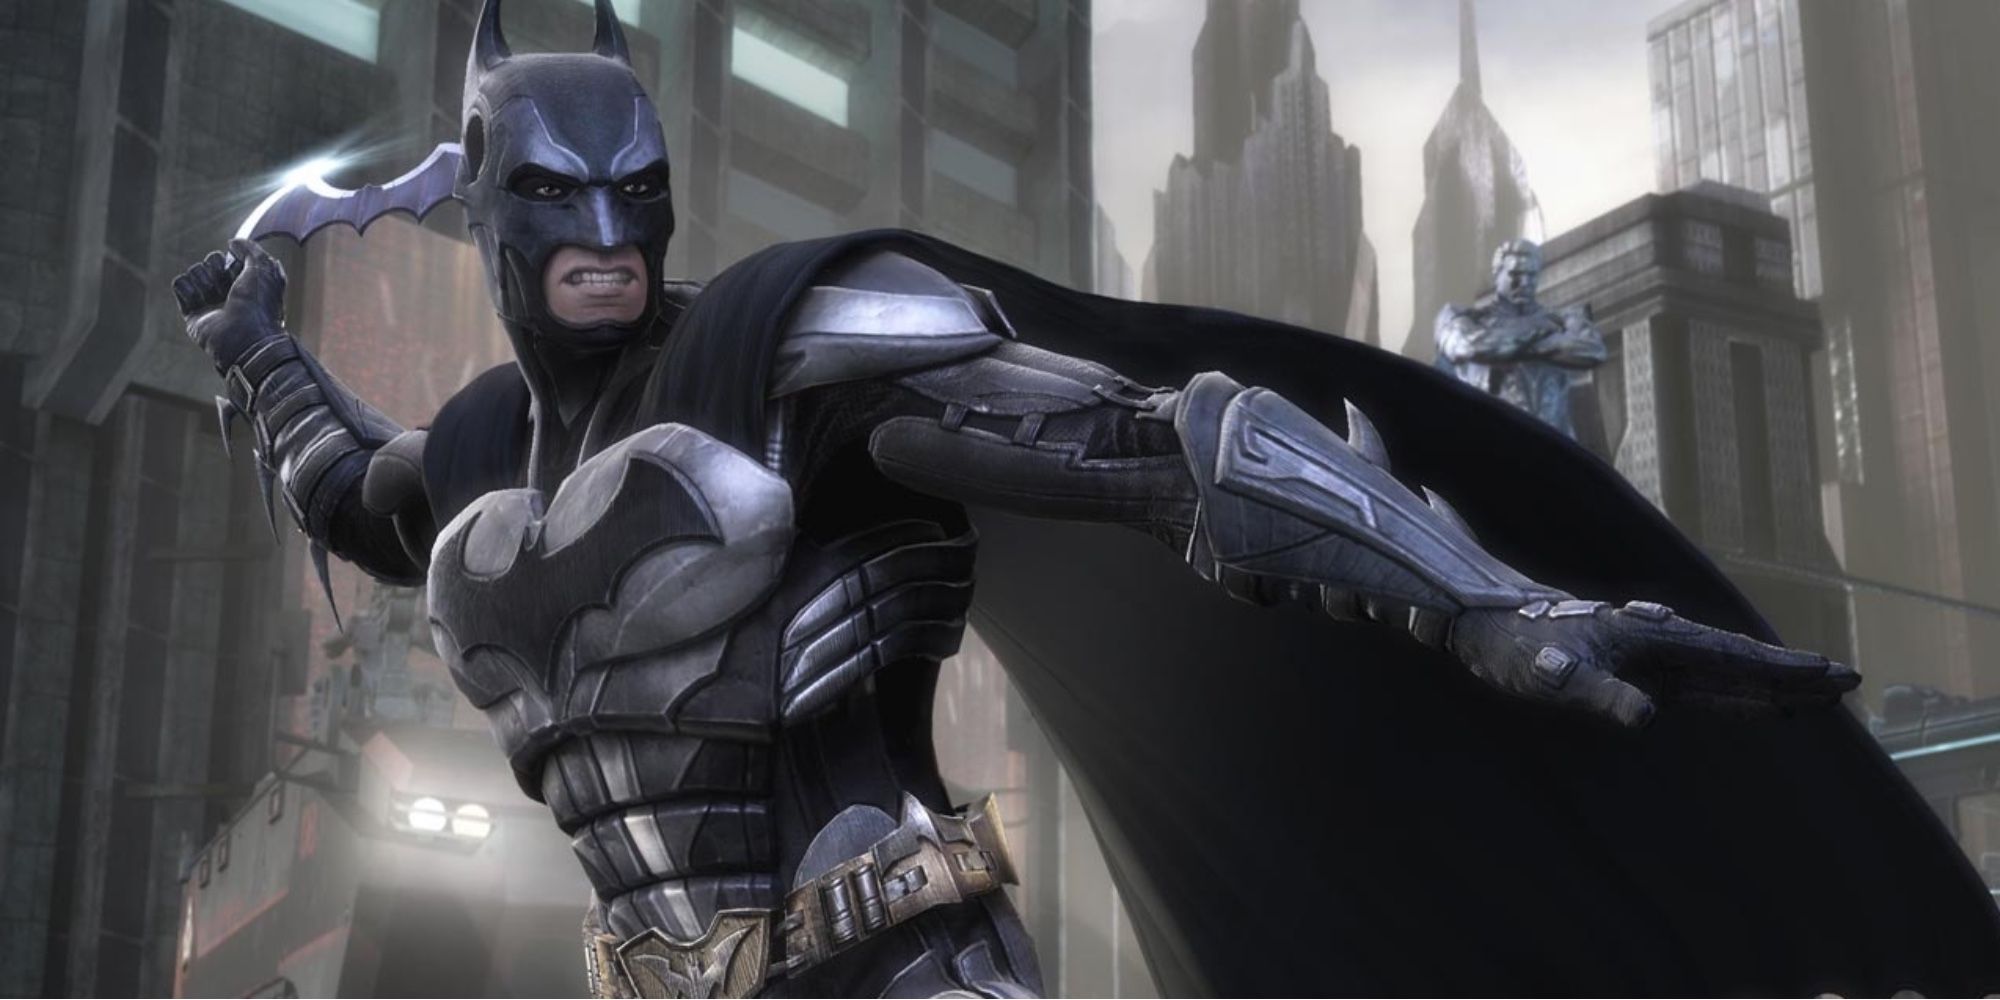 Aged Games Worth Playing in 2022 - Injustice - Gods Among Us - Batman uses Batarang on opponent